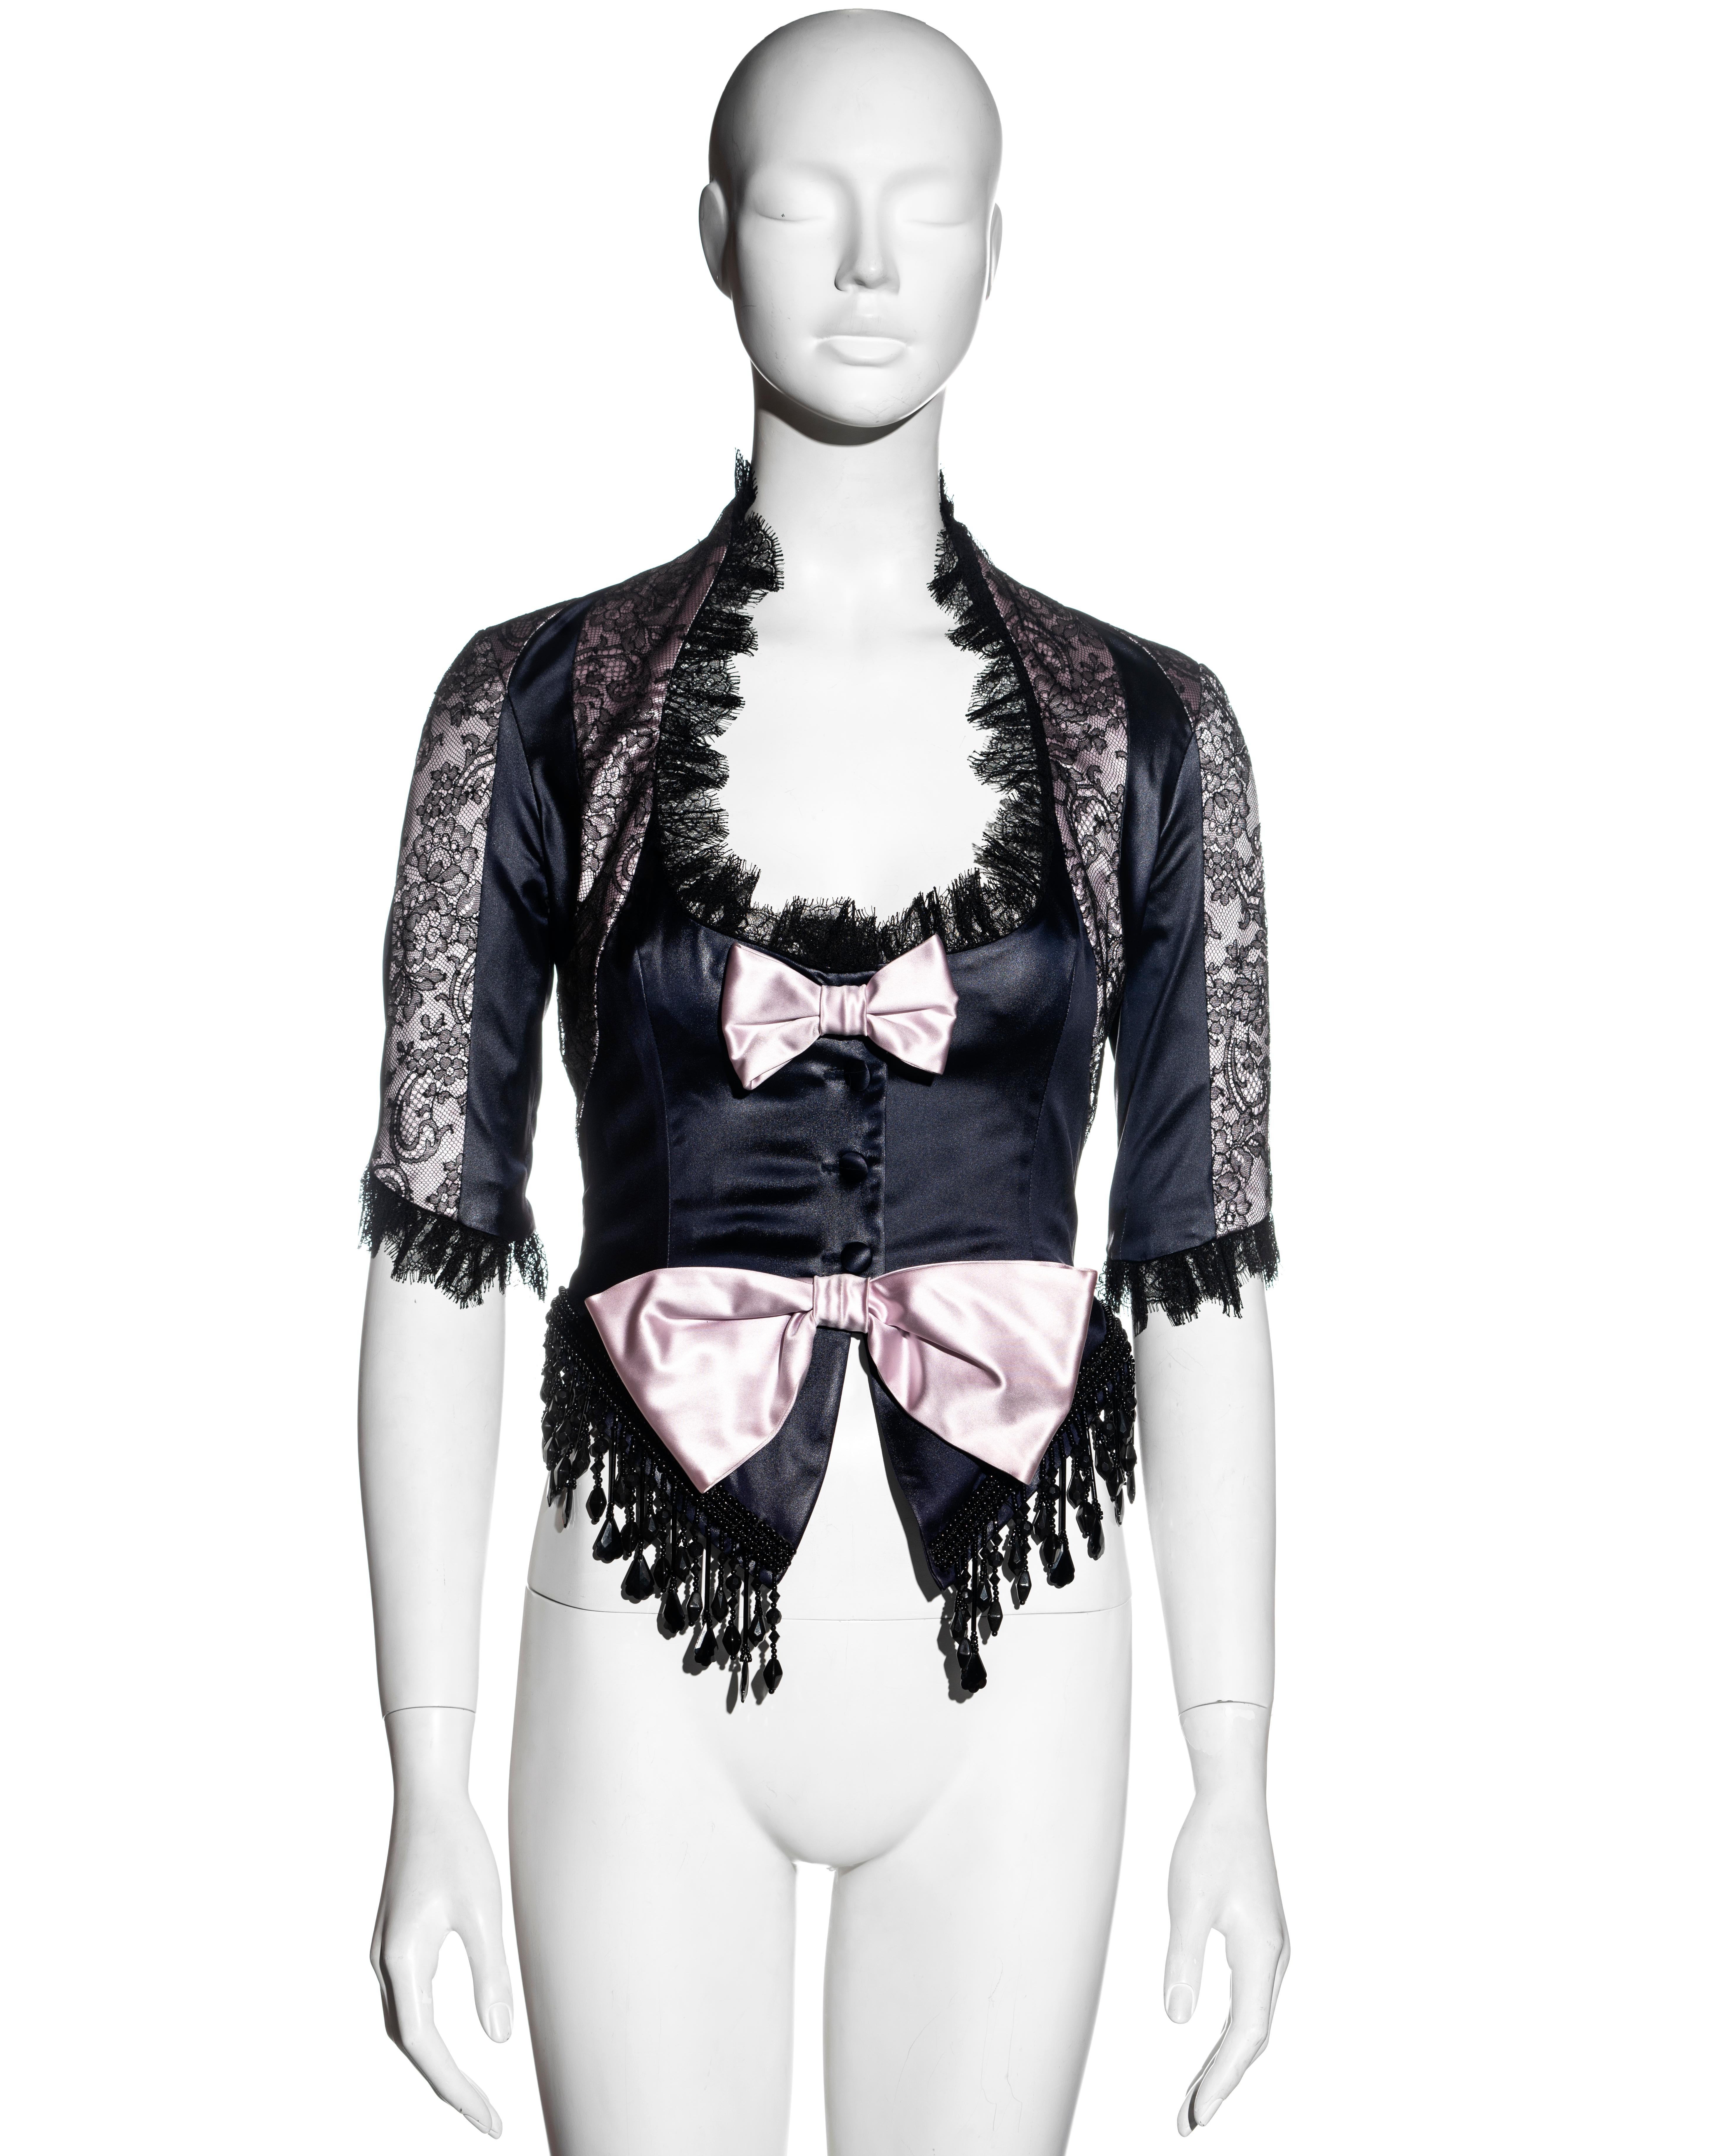 ▪ John Galliano long-sleeve corset 
▪ Black and pink satin acetate 
▪ Black lace trim and overlay to satin panels 
▪ 2 pink bows to the front 
▪ Beaded fringe trim along hemline 
▪ Bias-cut panels to the back panel and sleeves 
▪ 1 black velvet bow